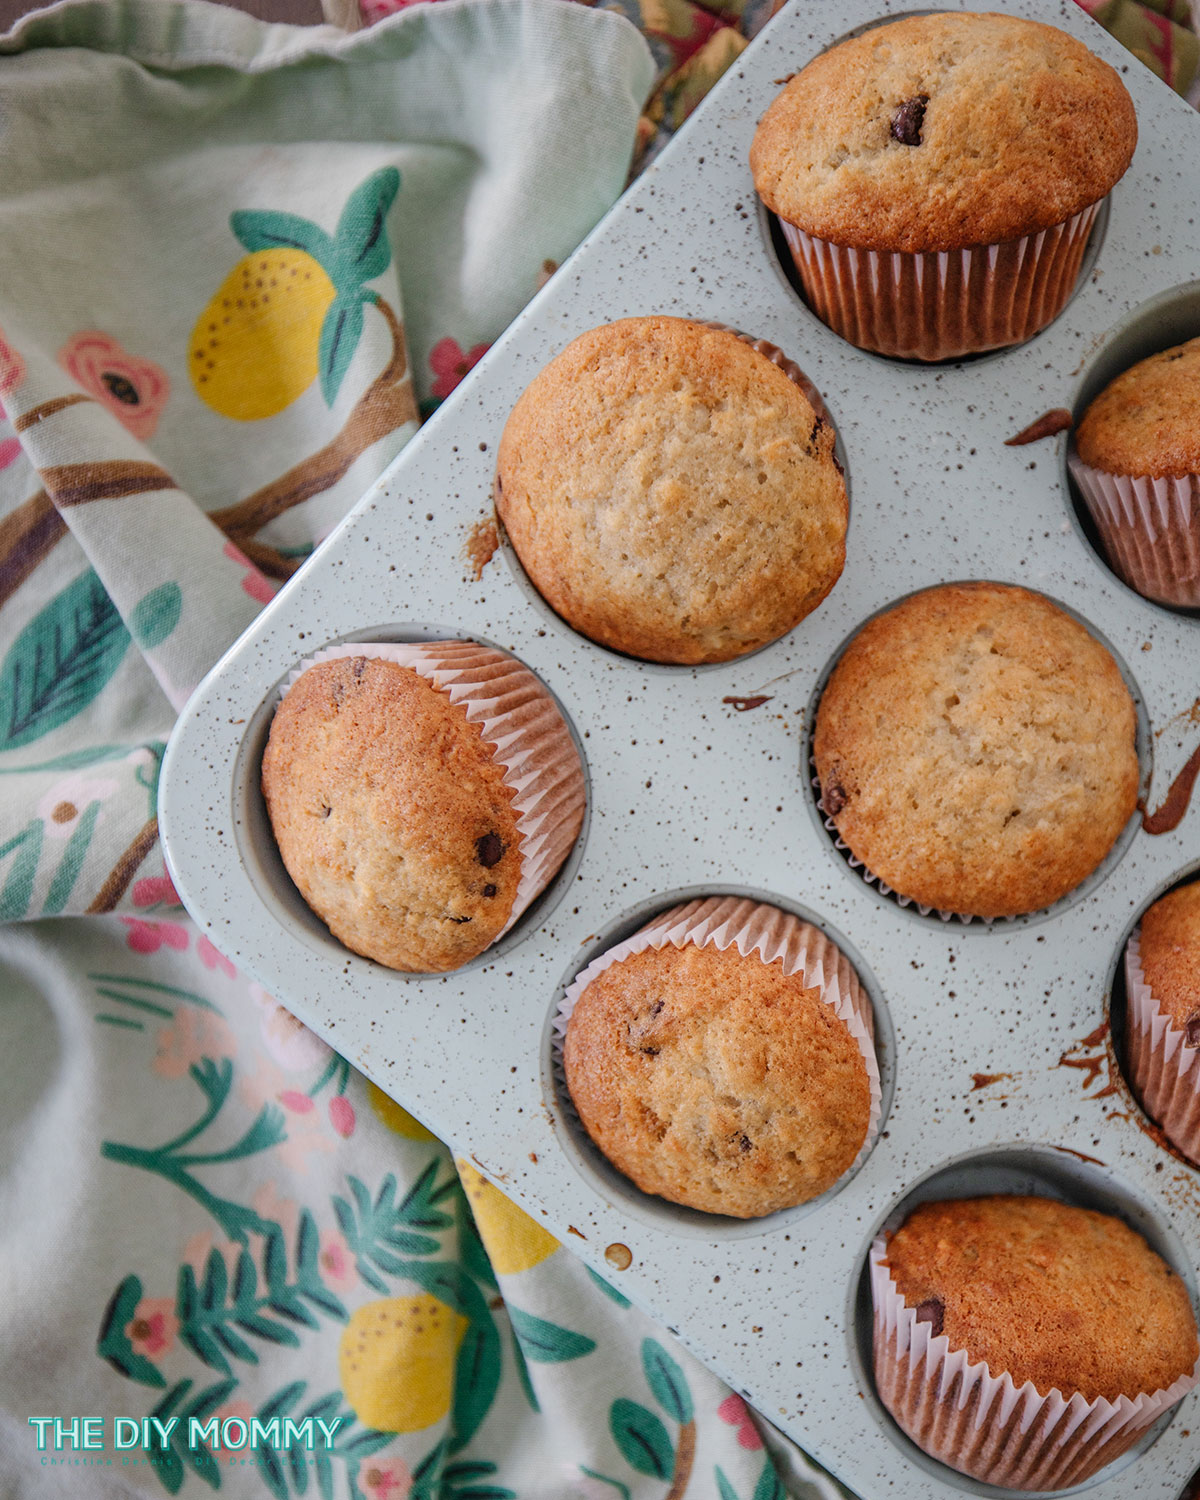 Banana Chocolate Chip Muffins – Our Family’s Best Recipe